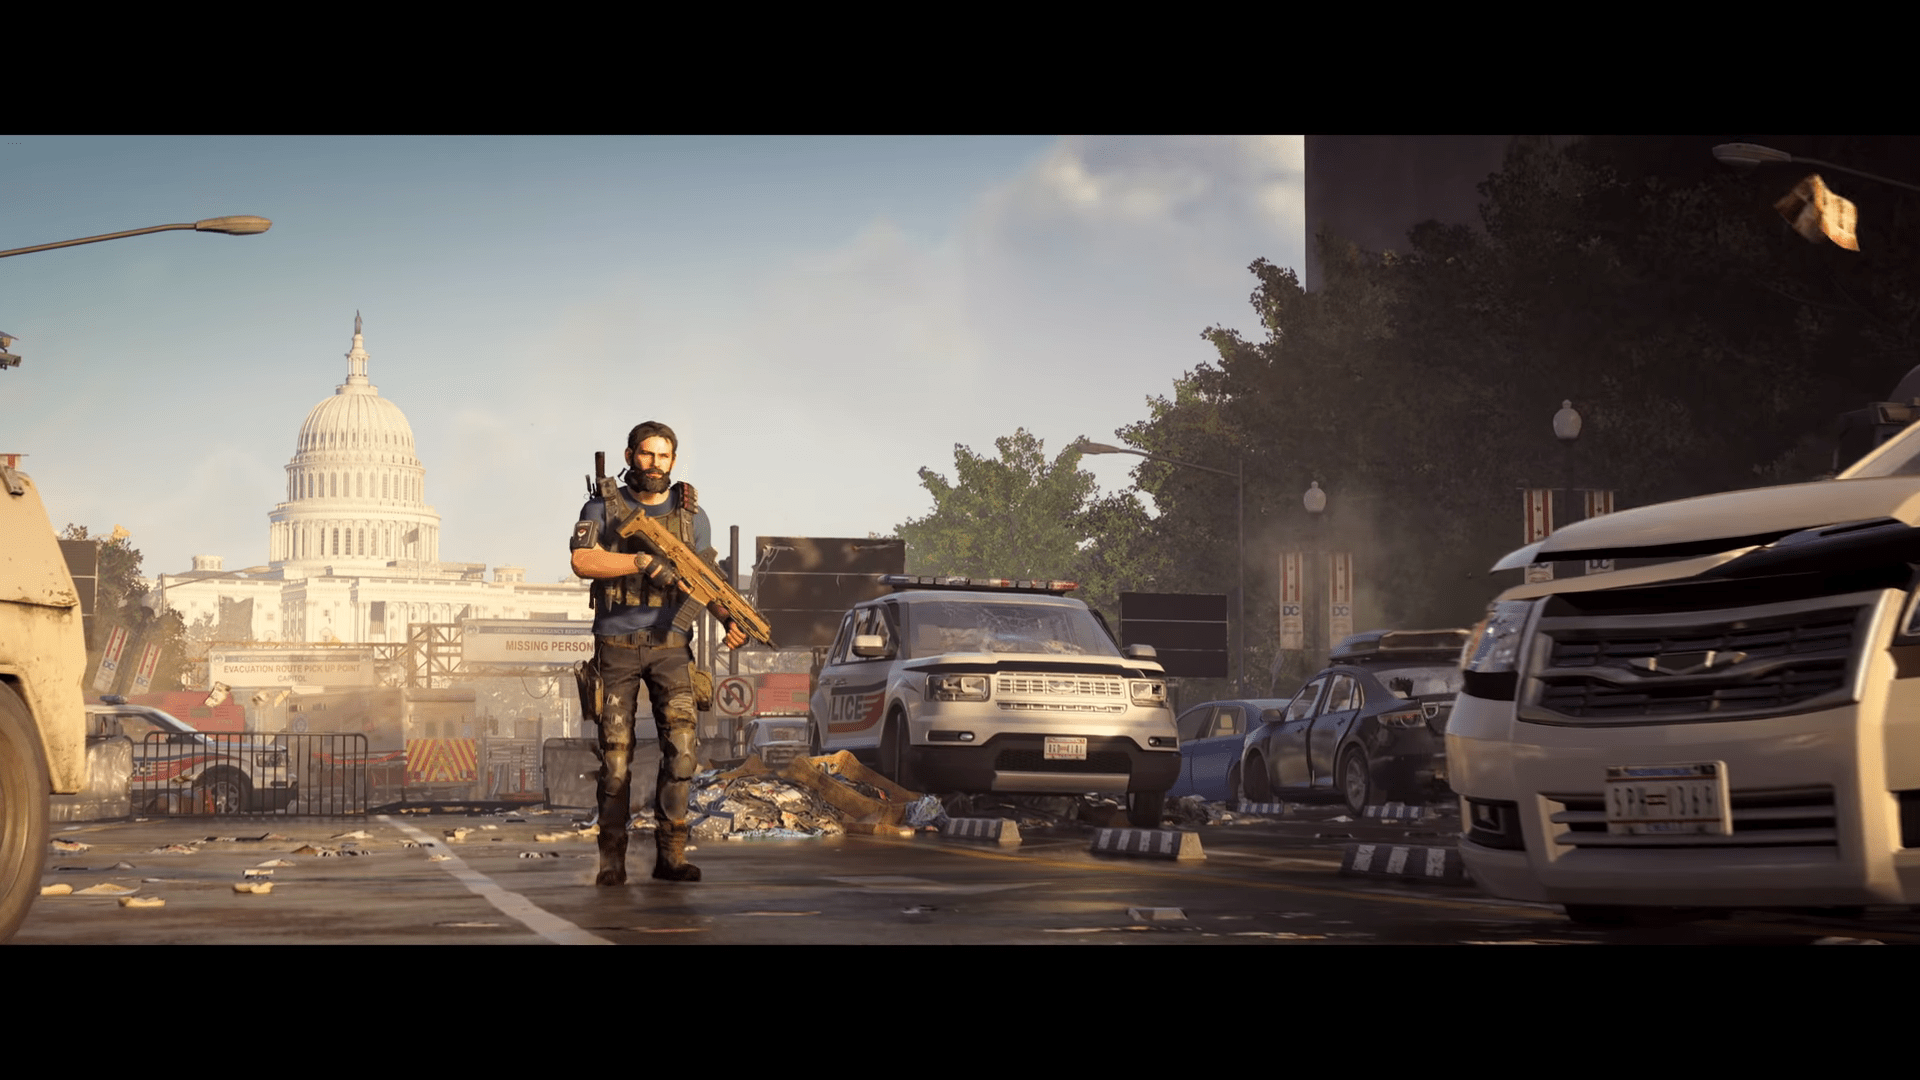 New Content Is Coming To The Division 2 Very Soon, And It’s Completely Free